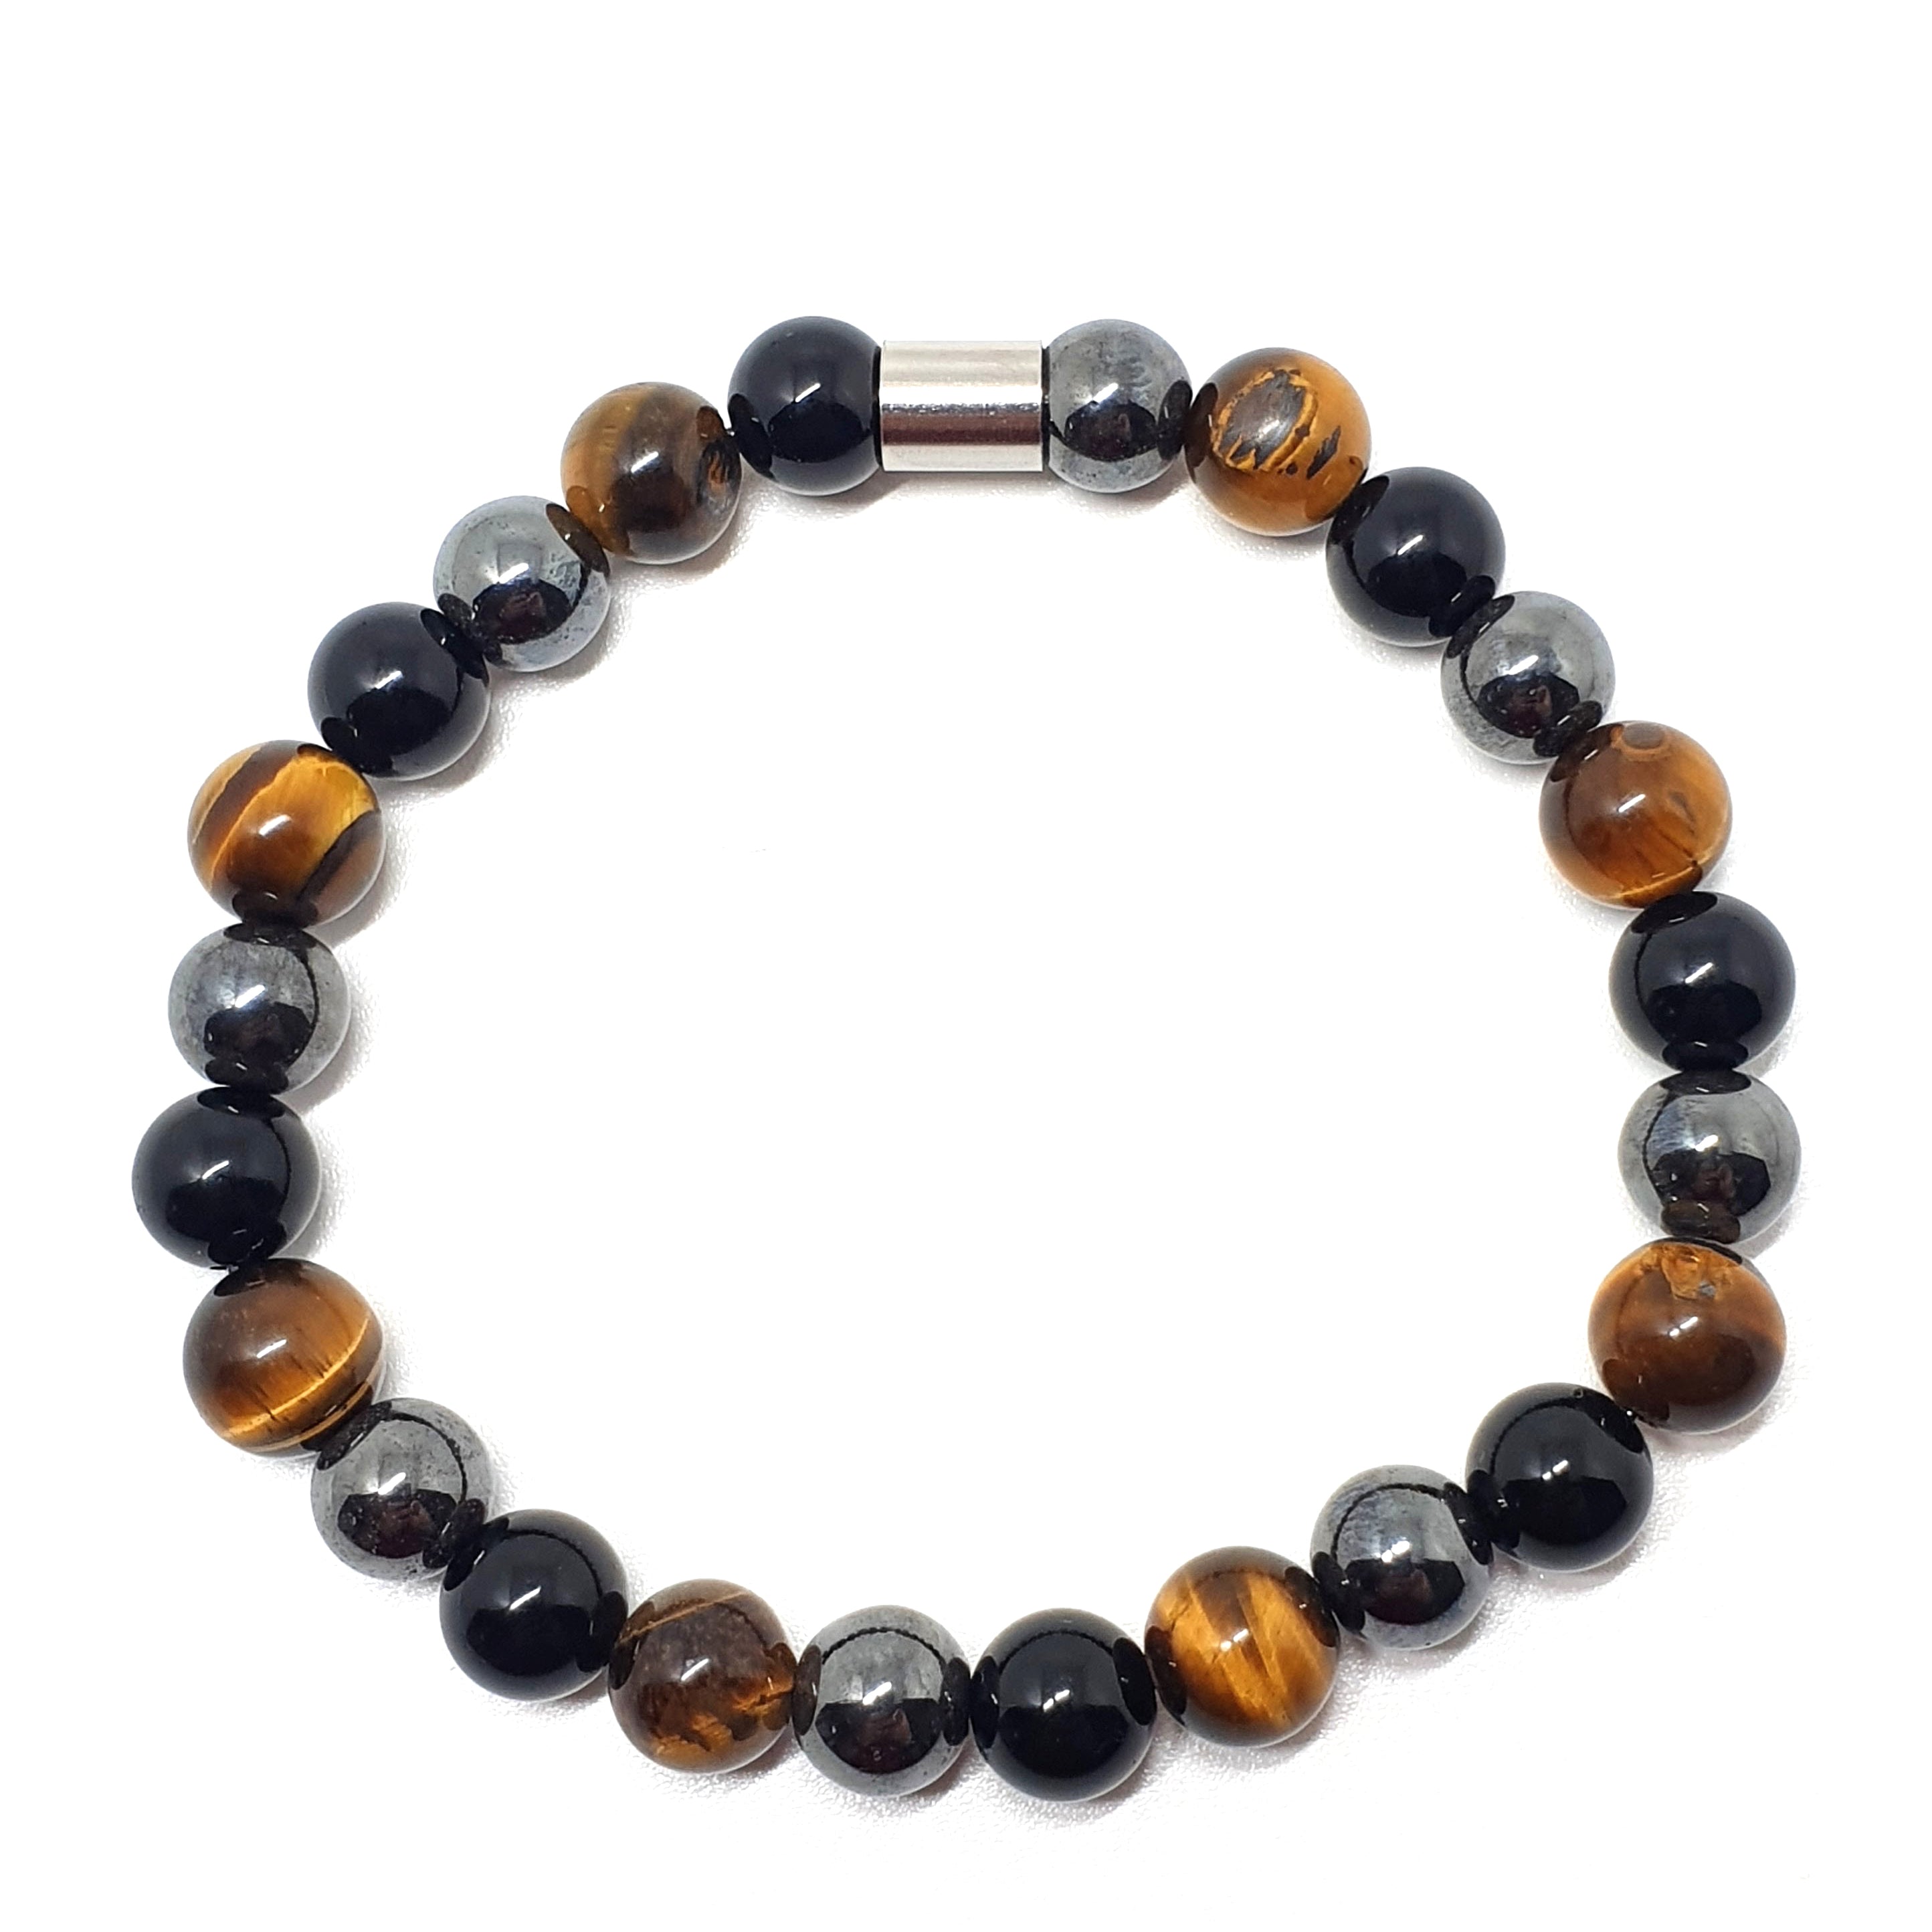 Hematite, Onyx and Tigers Eye with a stainless steel accessory from above